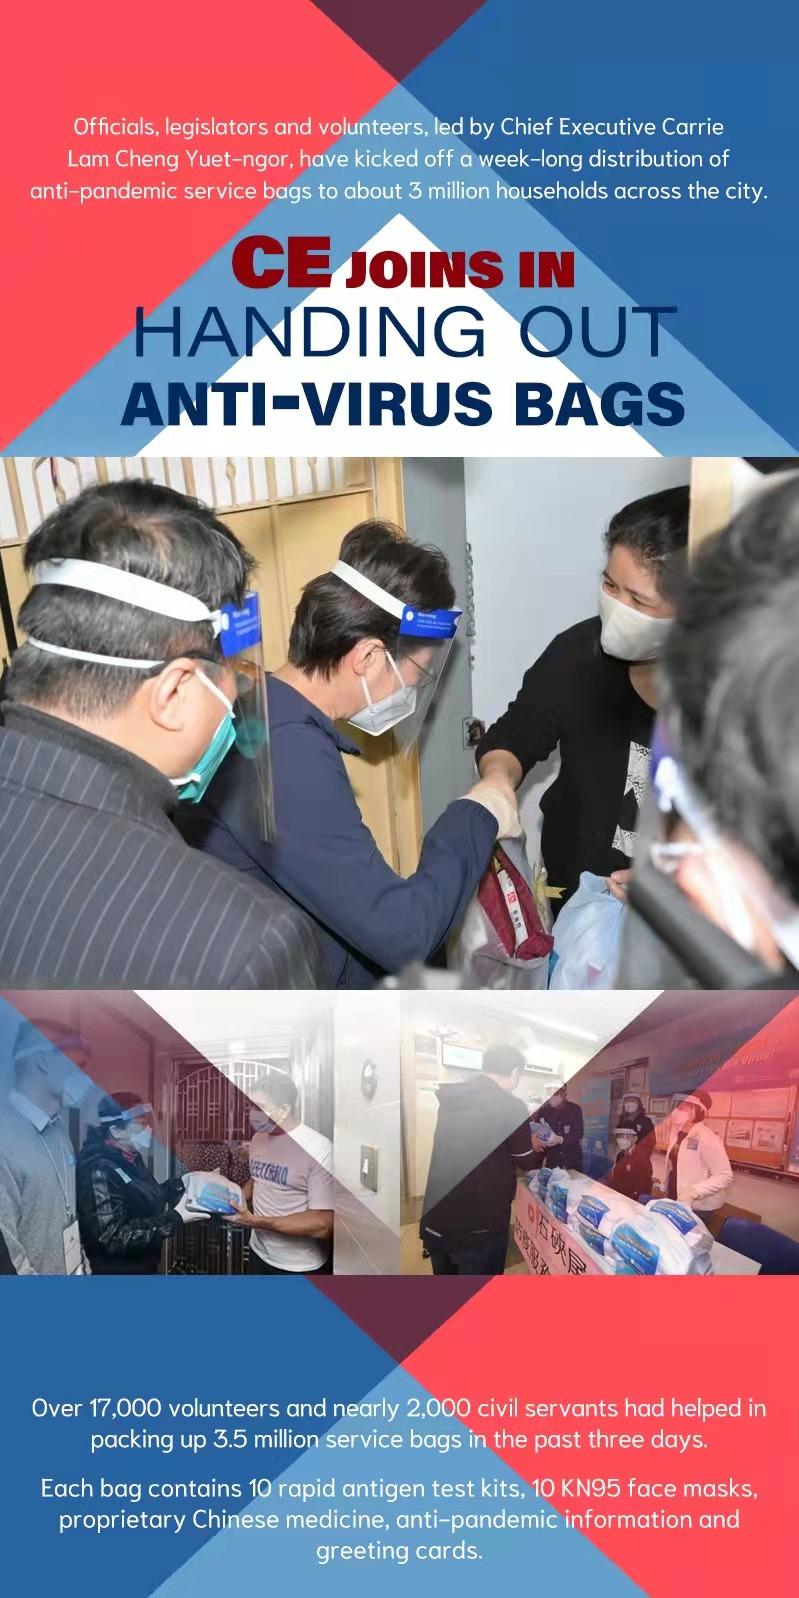 Carrie Lam joins in handing out anti-virus bags to 3 million HK households